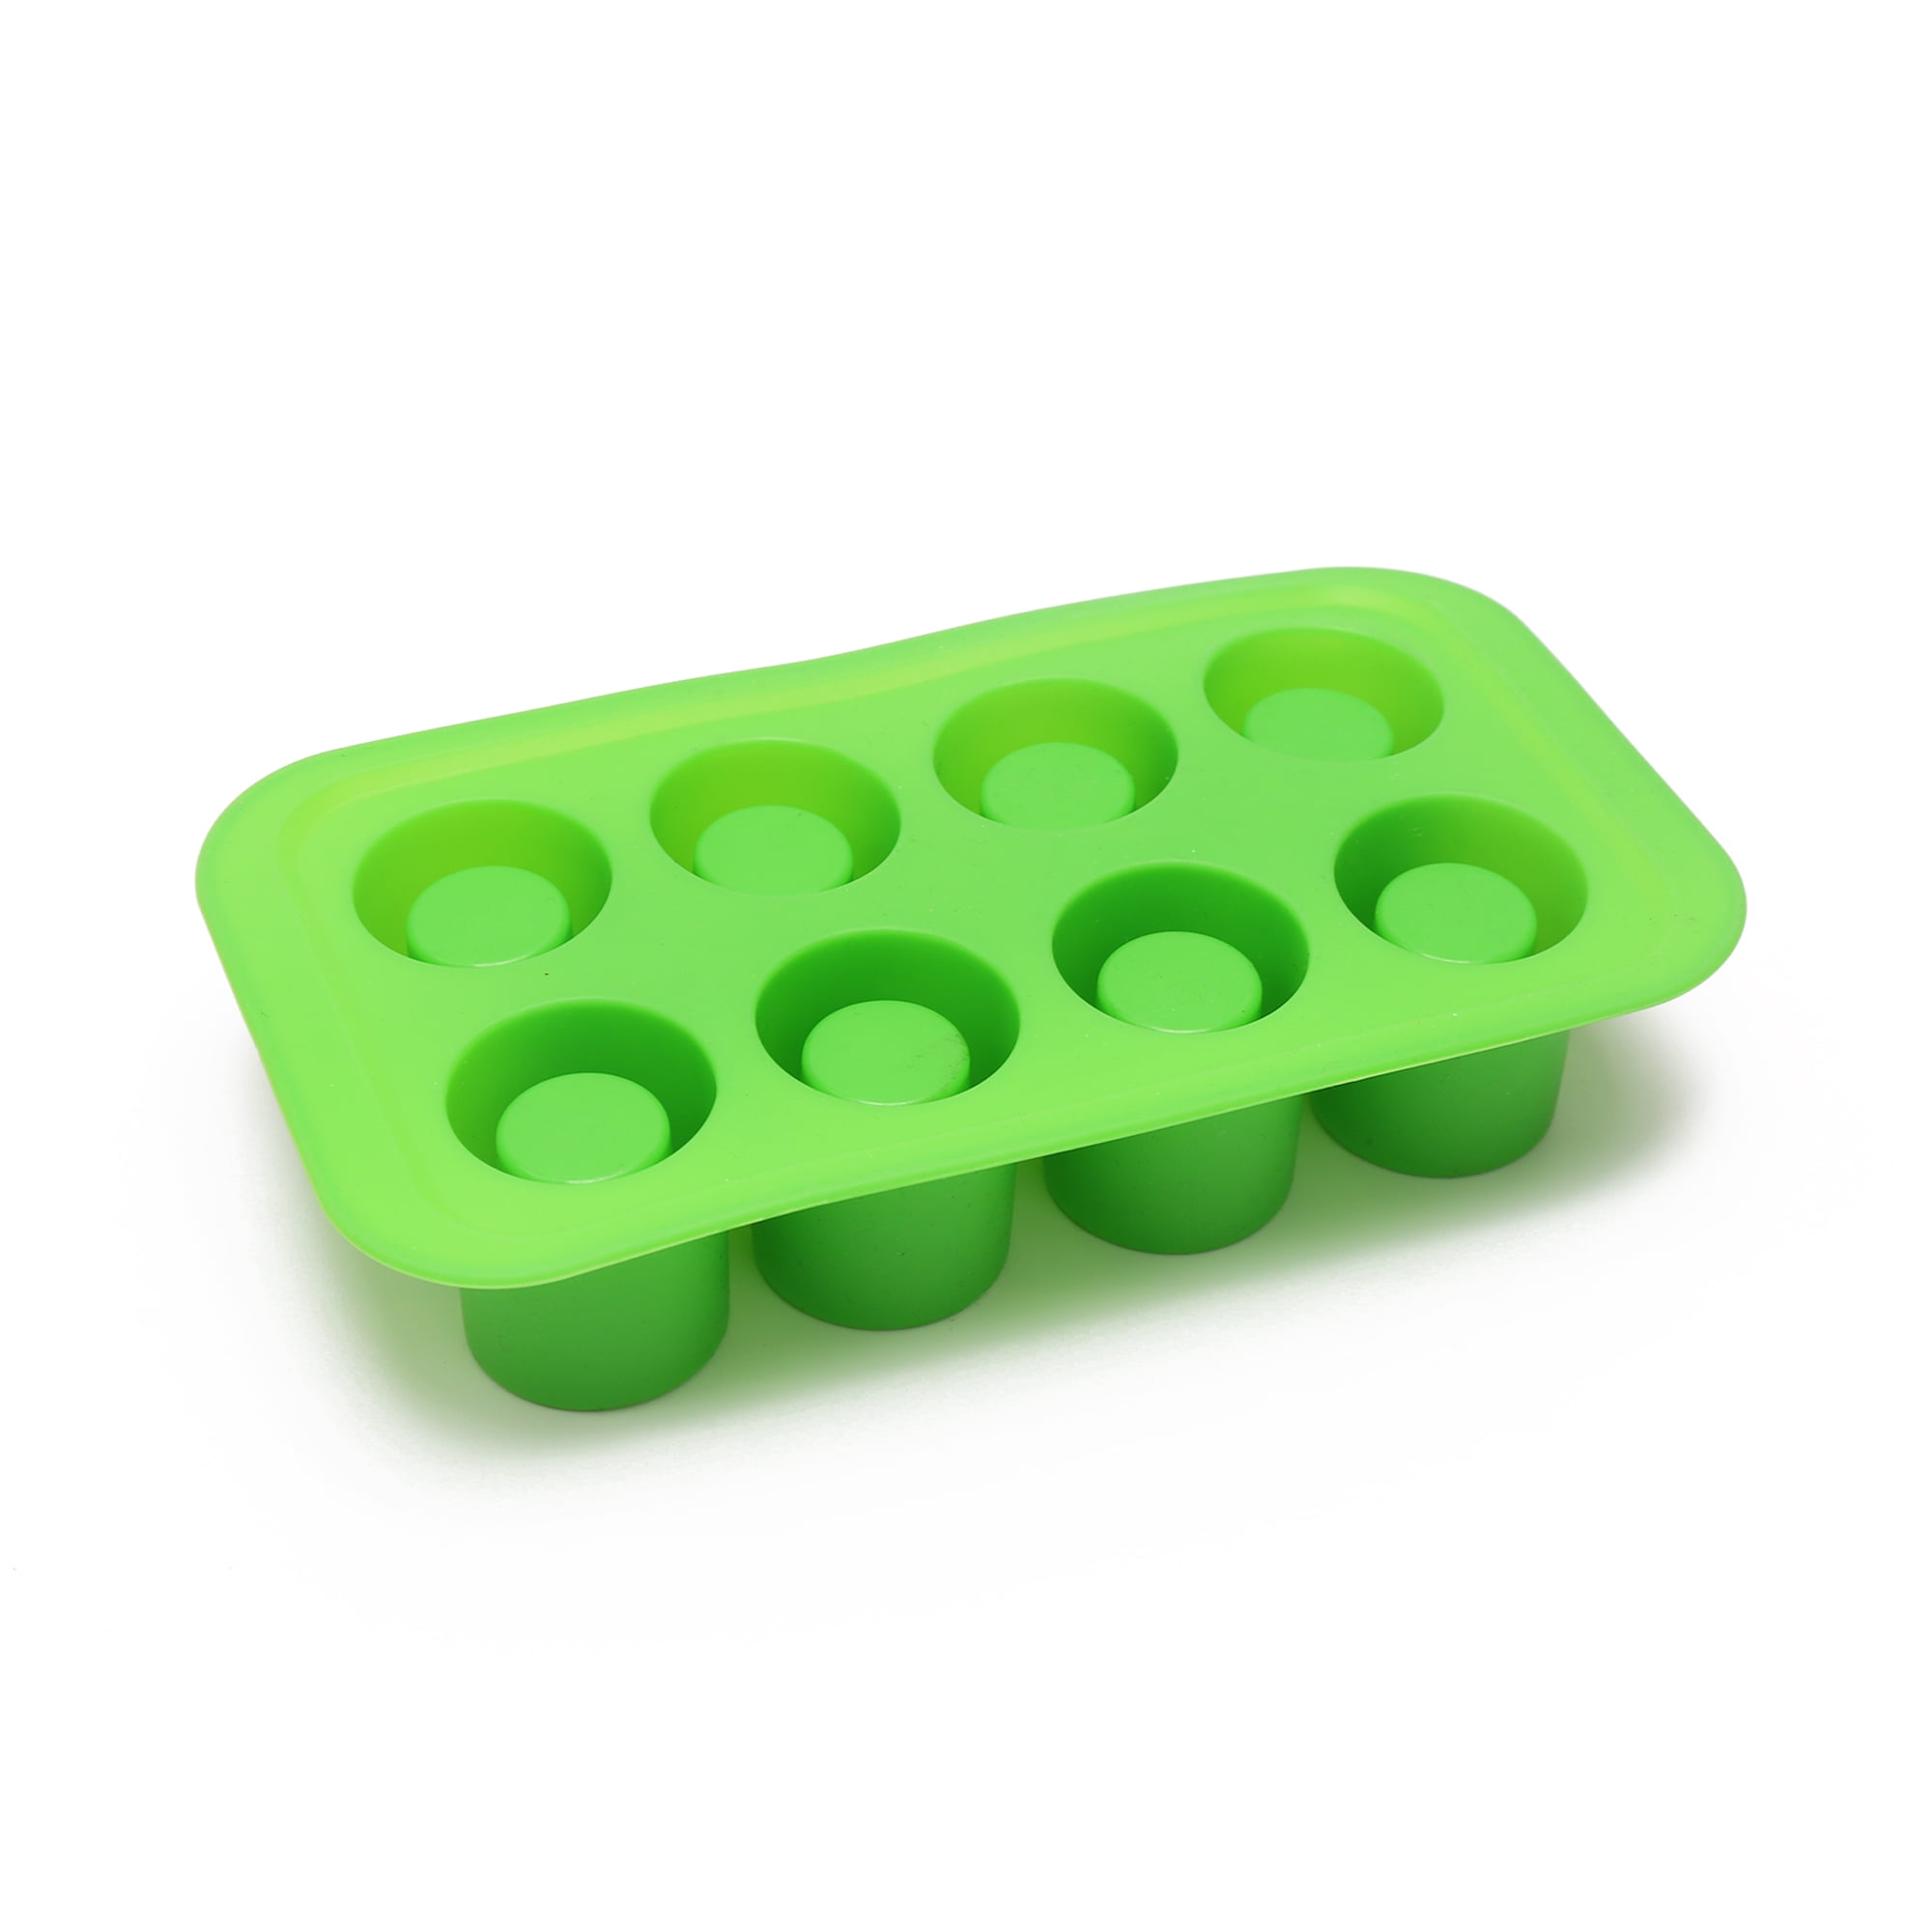 Silicone Cake Molds, 12-Cavity Flower Shapes Non-Stick Kitchen Baking Pans  Ice Cube Trays for Making Candy Chocolate Muffin Cup